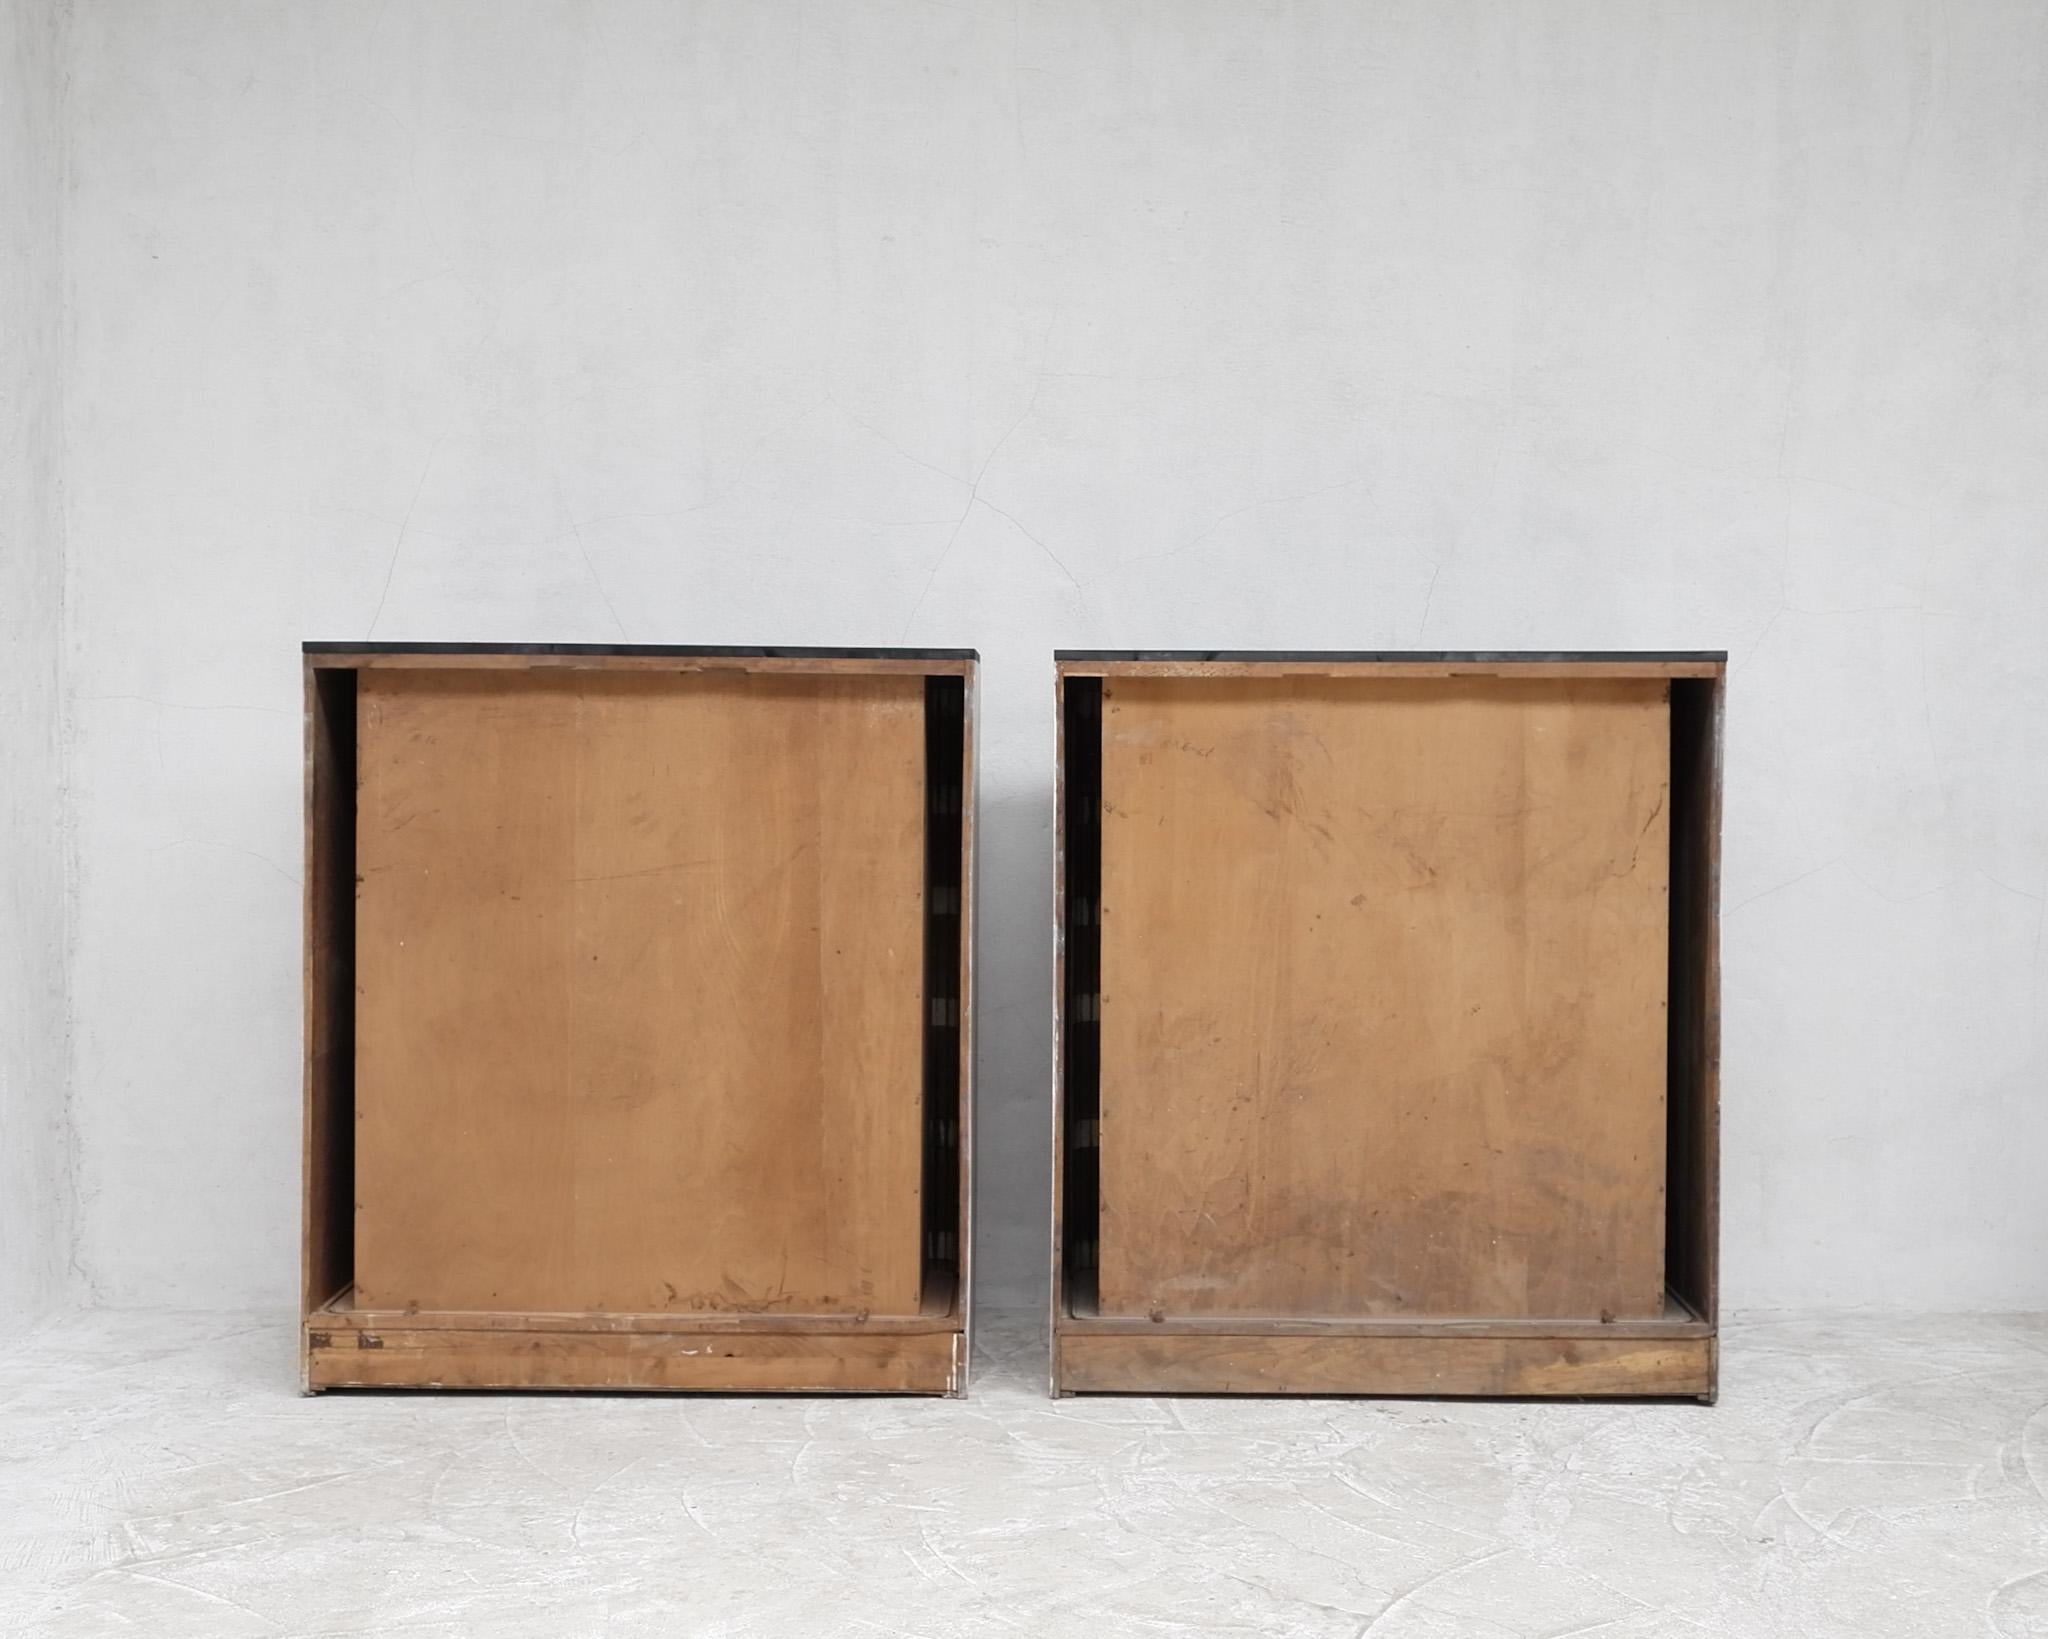 Rare Pair of French Modernist Art Deco Cerused/Limed Oak Tambour Cabinets For Sale 6